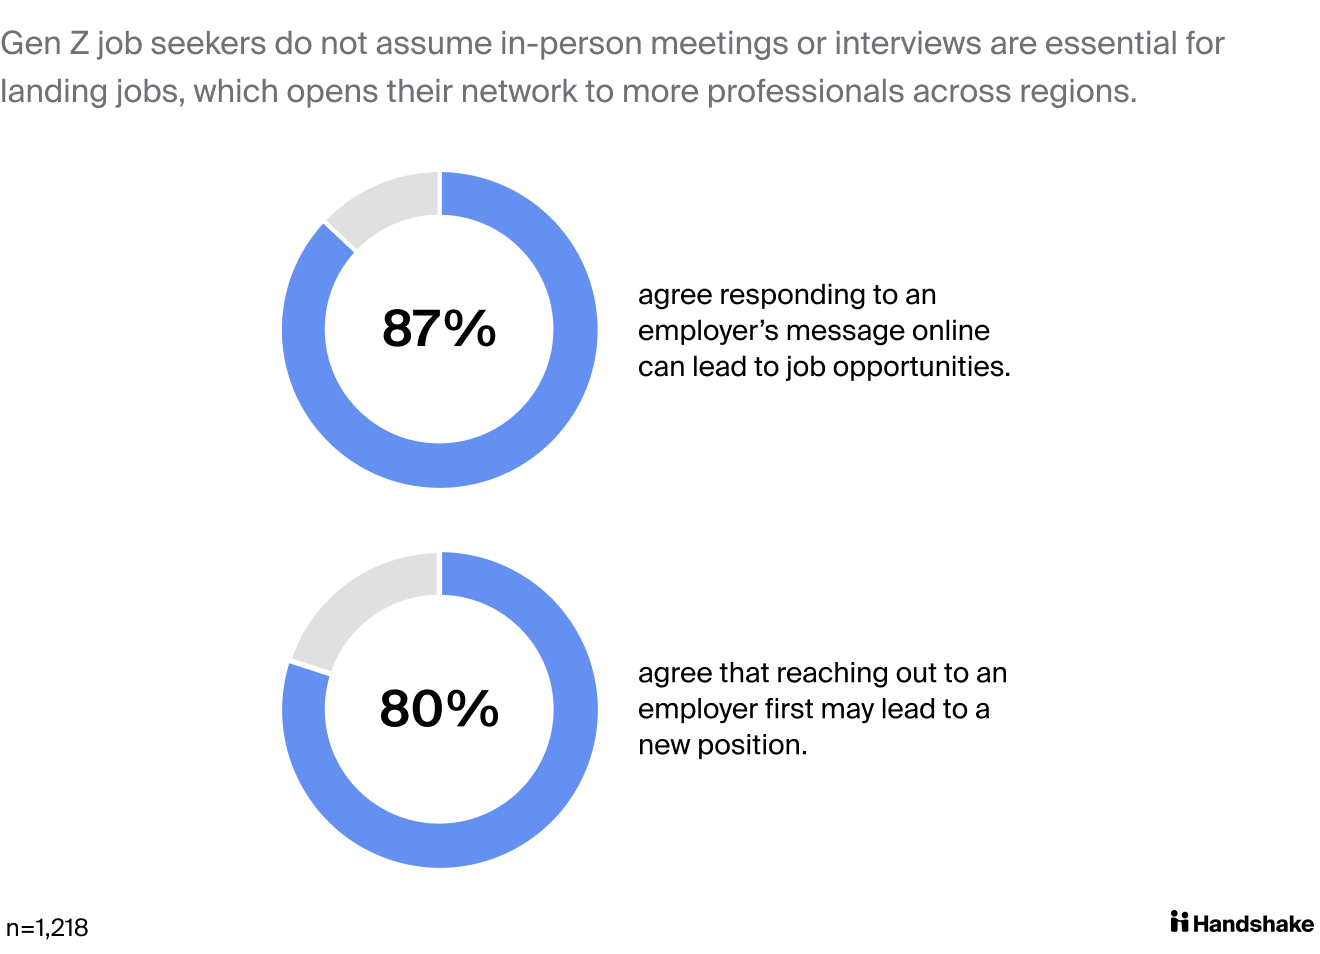 Gen Z job seekers do not assume in-person meetings or interviews are essential for landing jobs, which opens their network to more professionals across regions . When it comes to connections, 87% of Gen Z agrees that responding to an employer's message online can lead to job opportunities and 80% agree that reaching out to an employer first may lead to a new position.